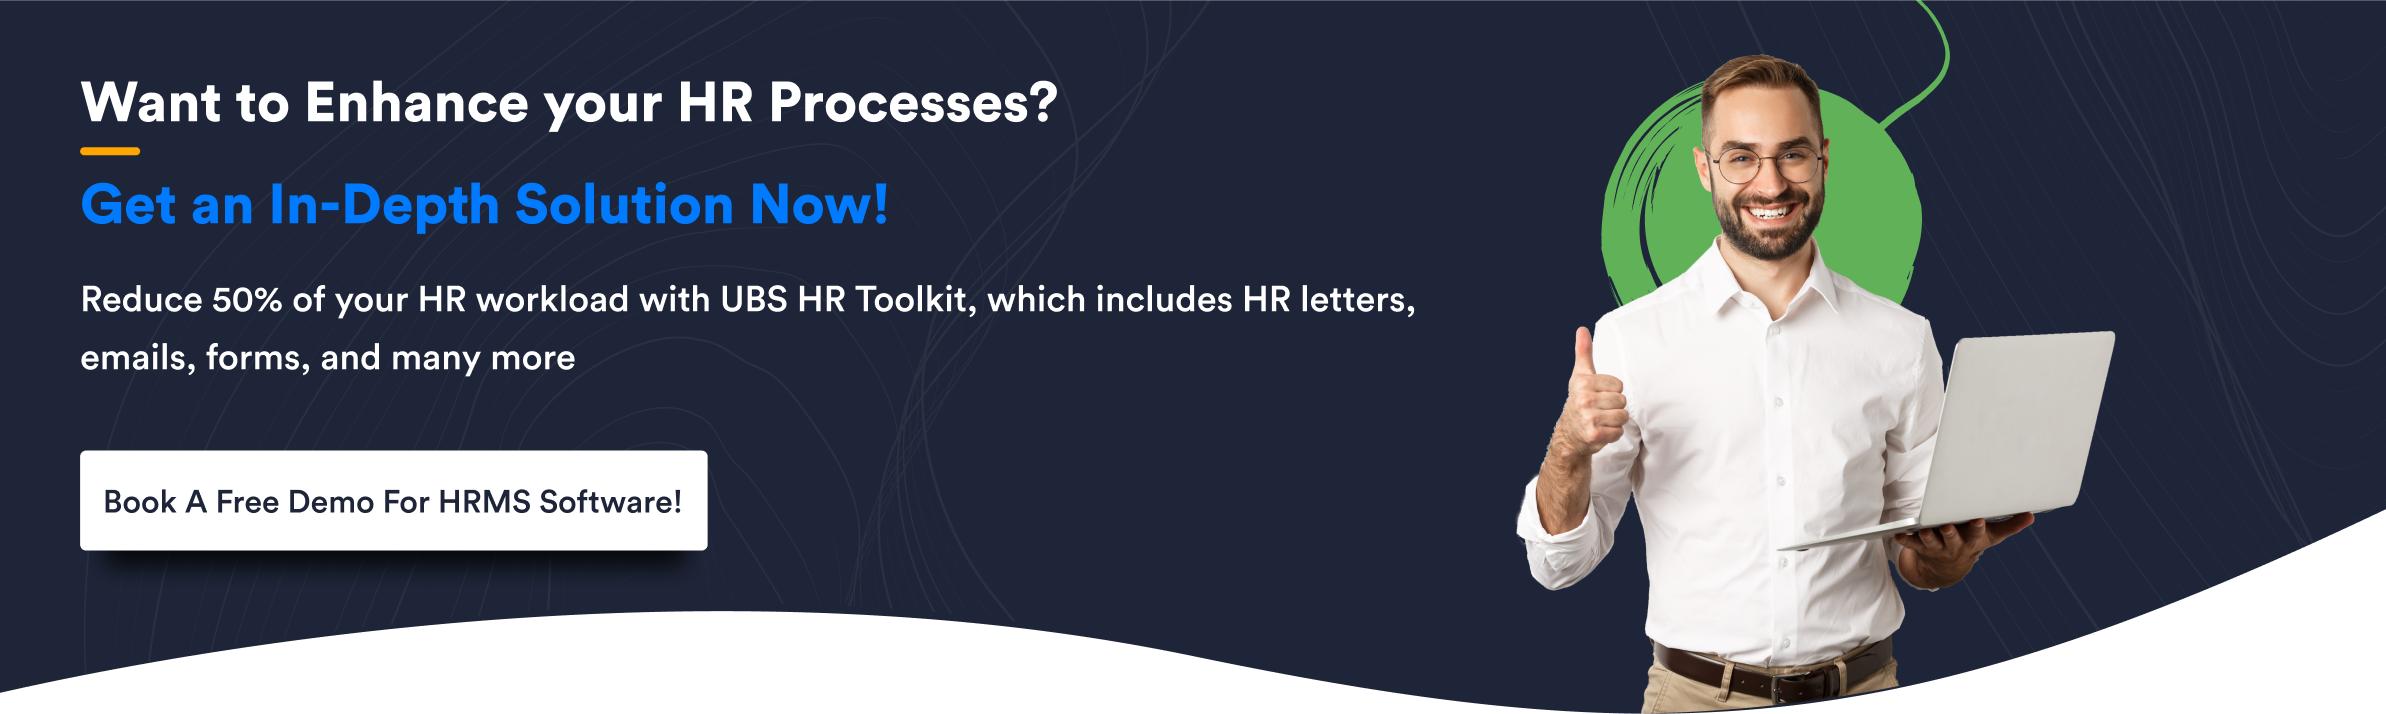 Want to Enhance your HR Processes 3